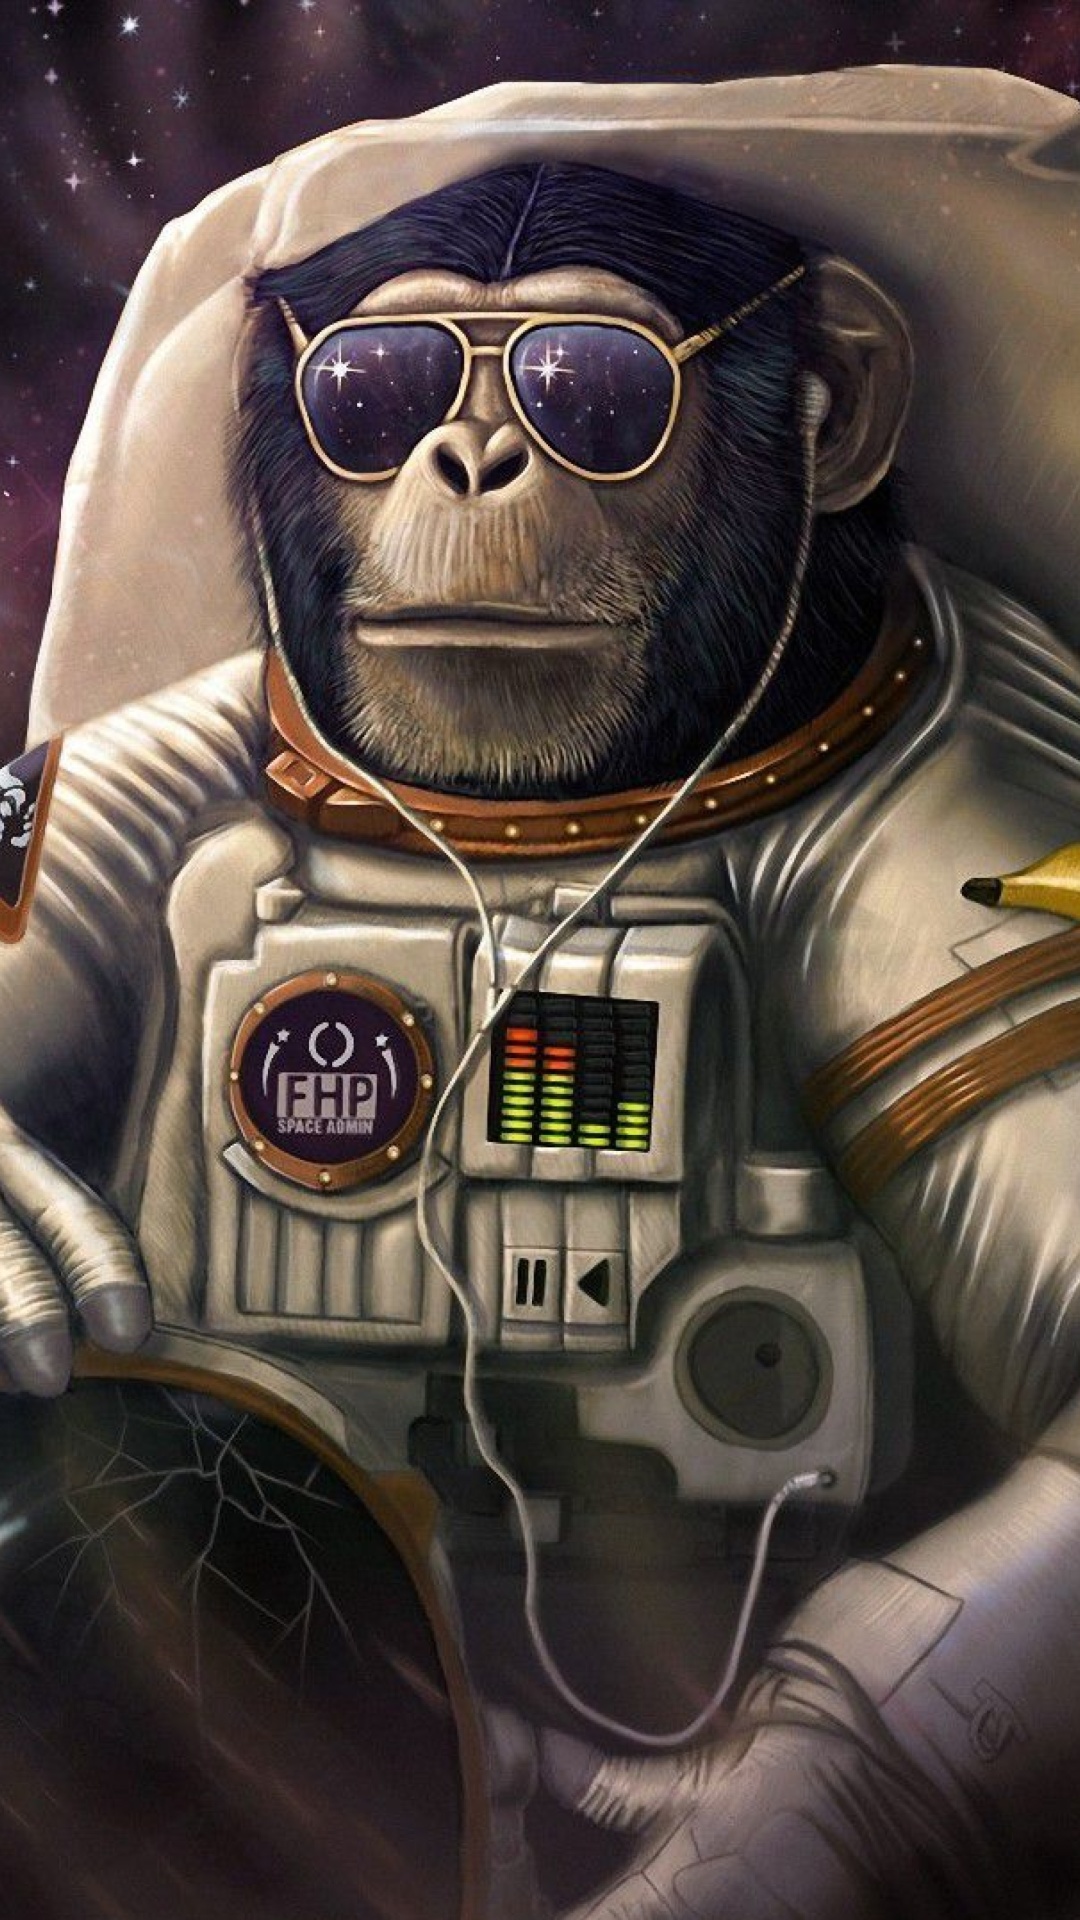 Monkeys and apes in space wallpaper 1080x1920